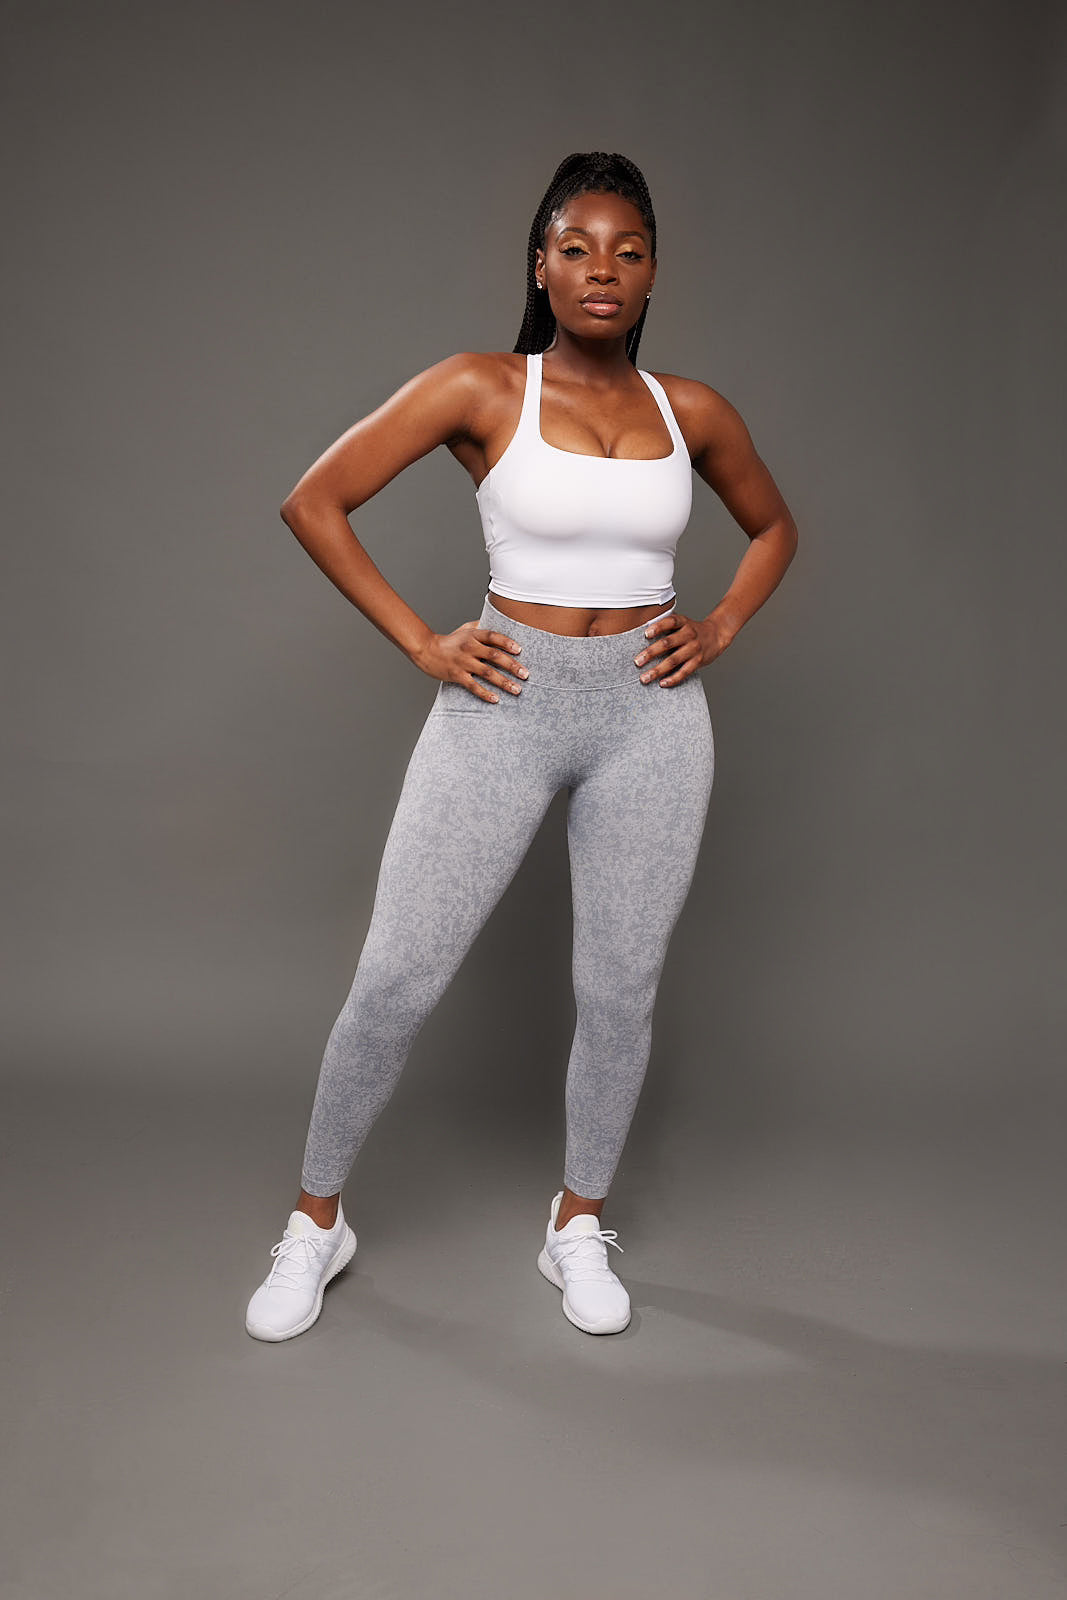 fit black woman posing for a woman-owned black owned business wearing unique white and grey activewear set that feature seamless scrunch butt high waist leggings and open back sports bra